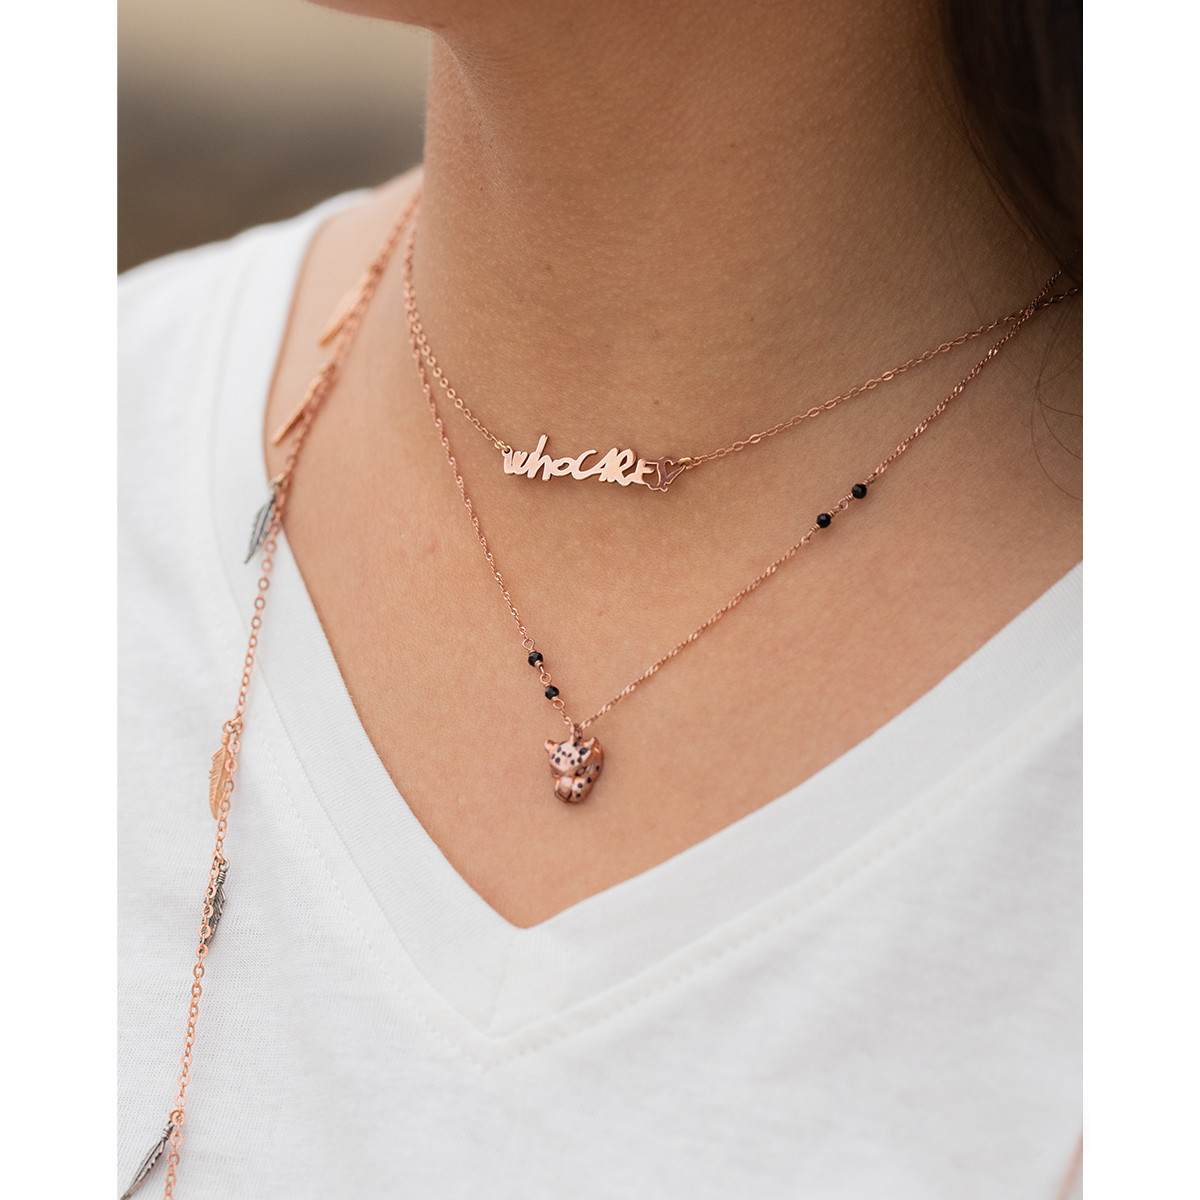 WHO CARES NECKLACE